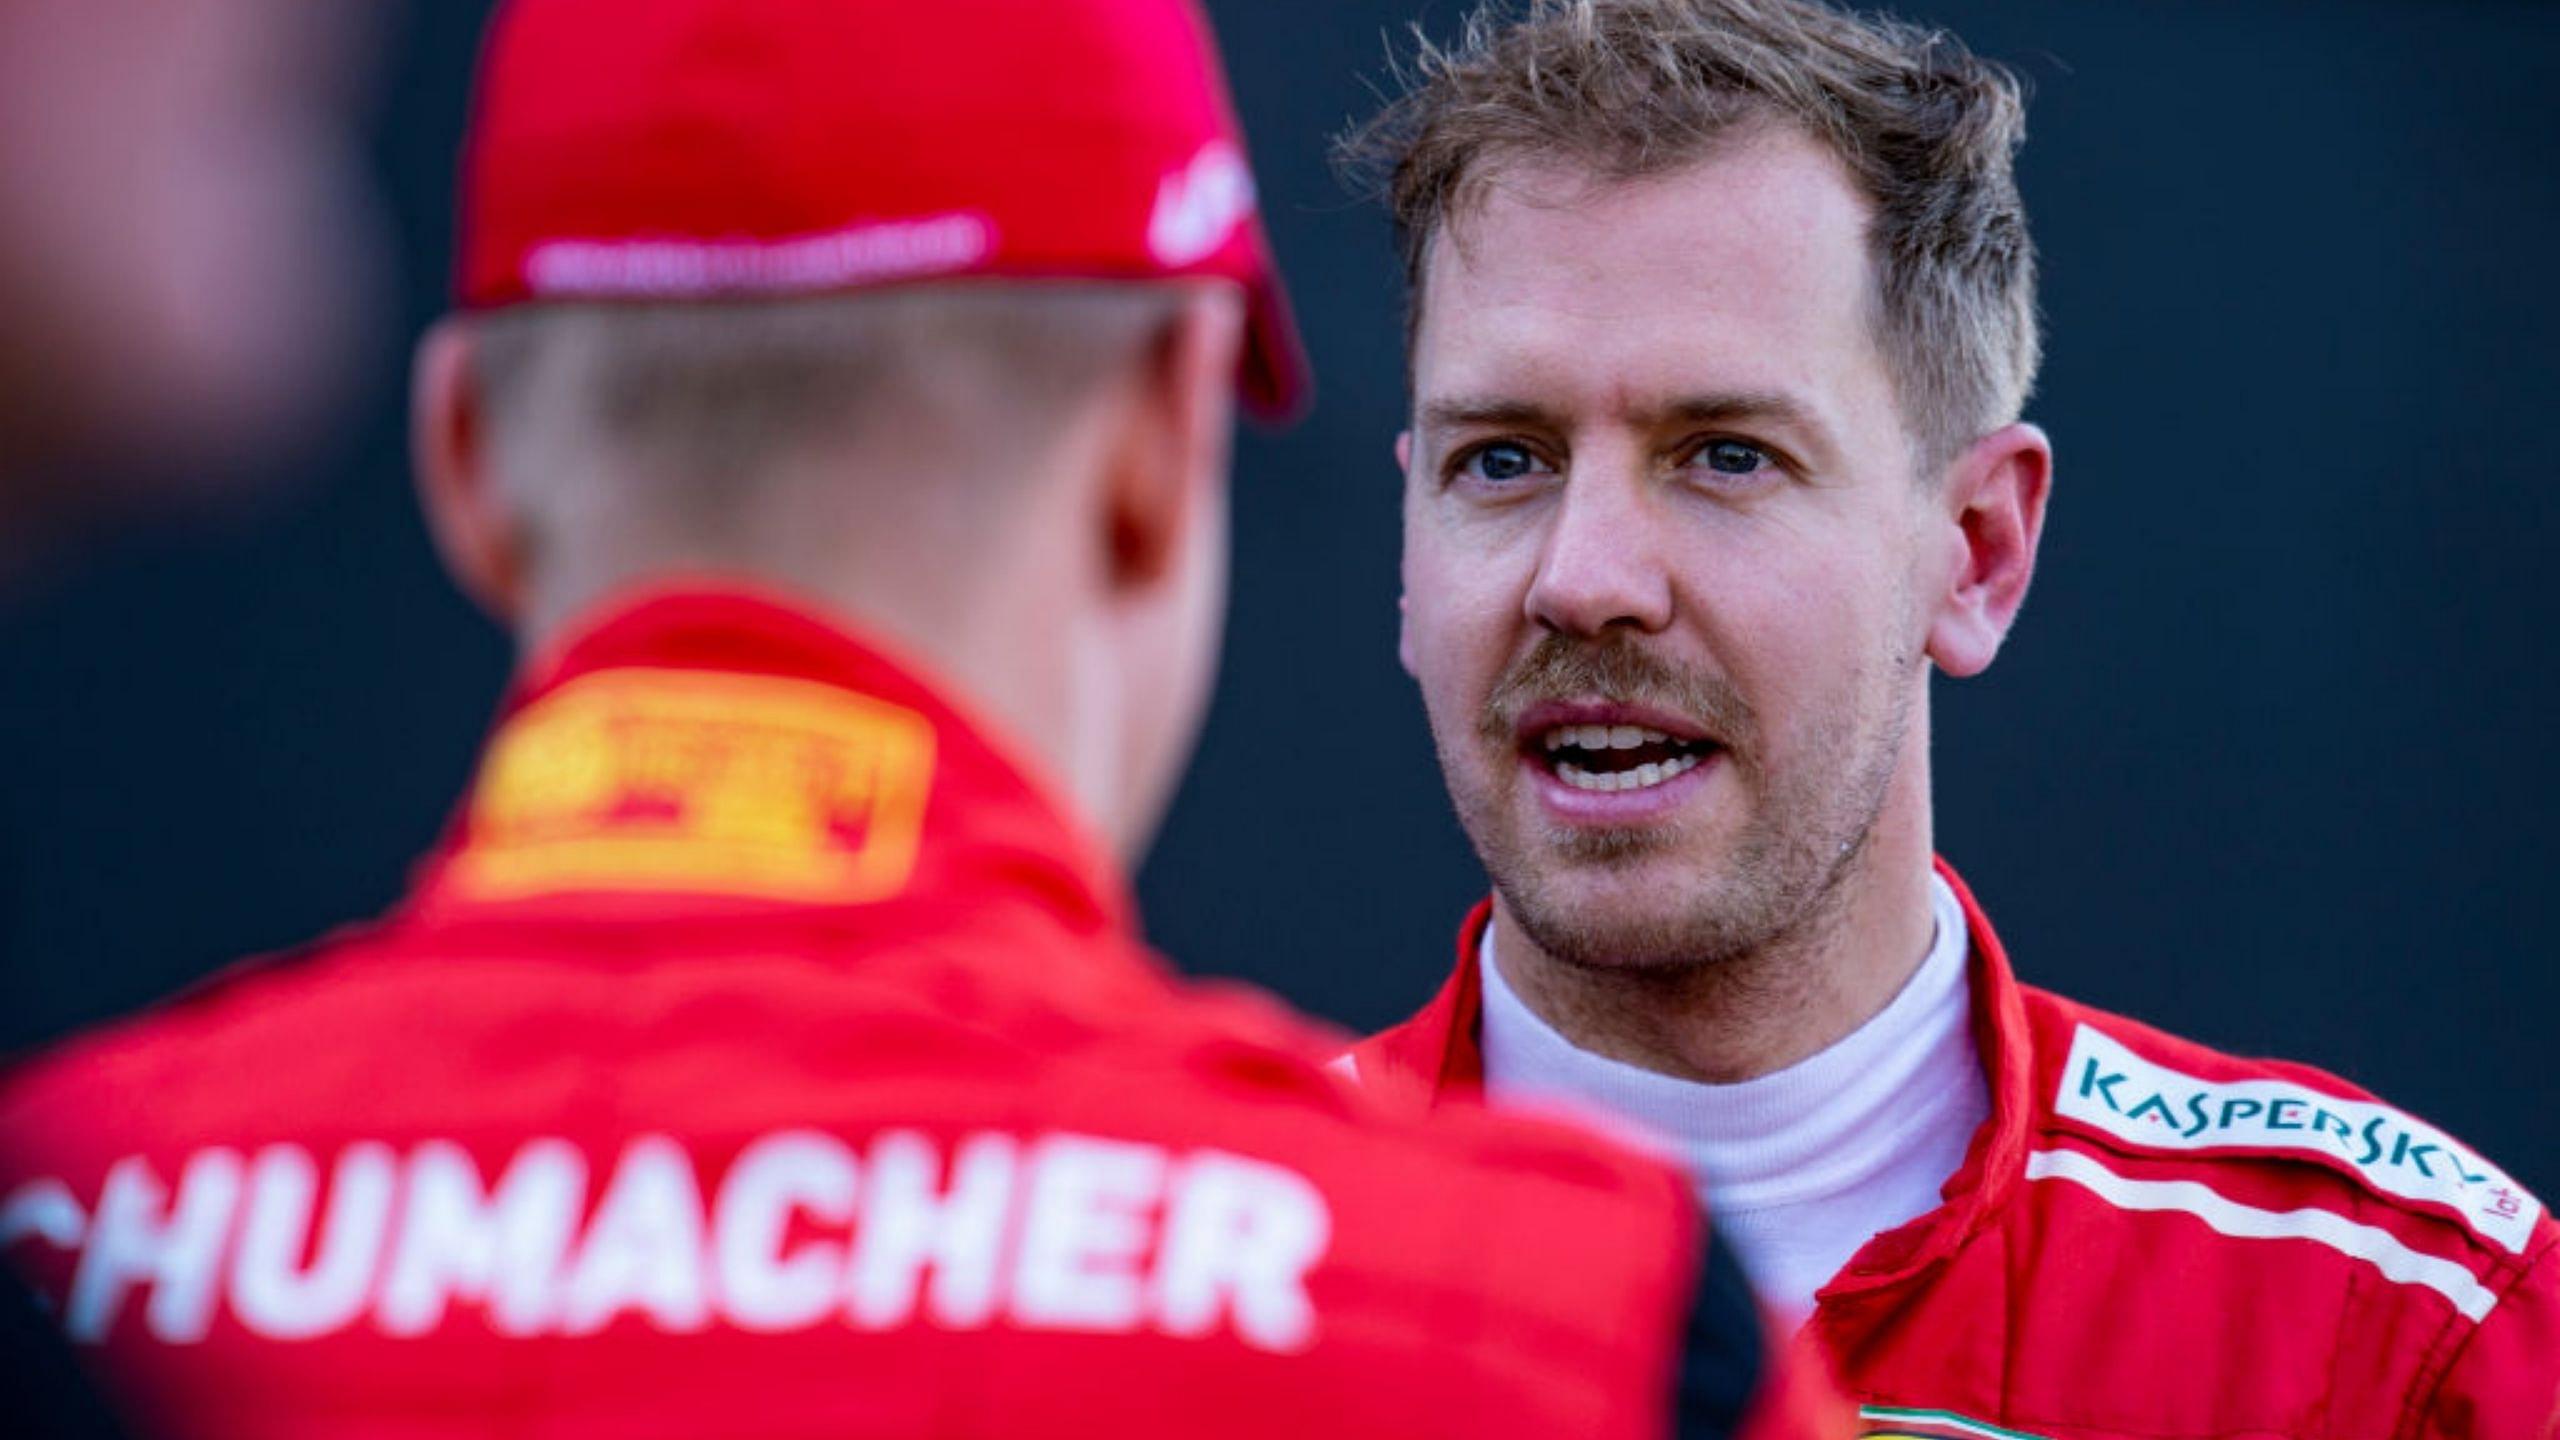 “It will be just like the end of a relationship” - Sebastian Vettel pays tribute to Ferrari as he prepares for his Aston Martin journey